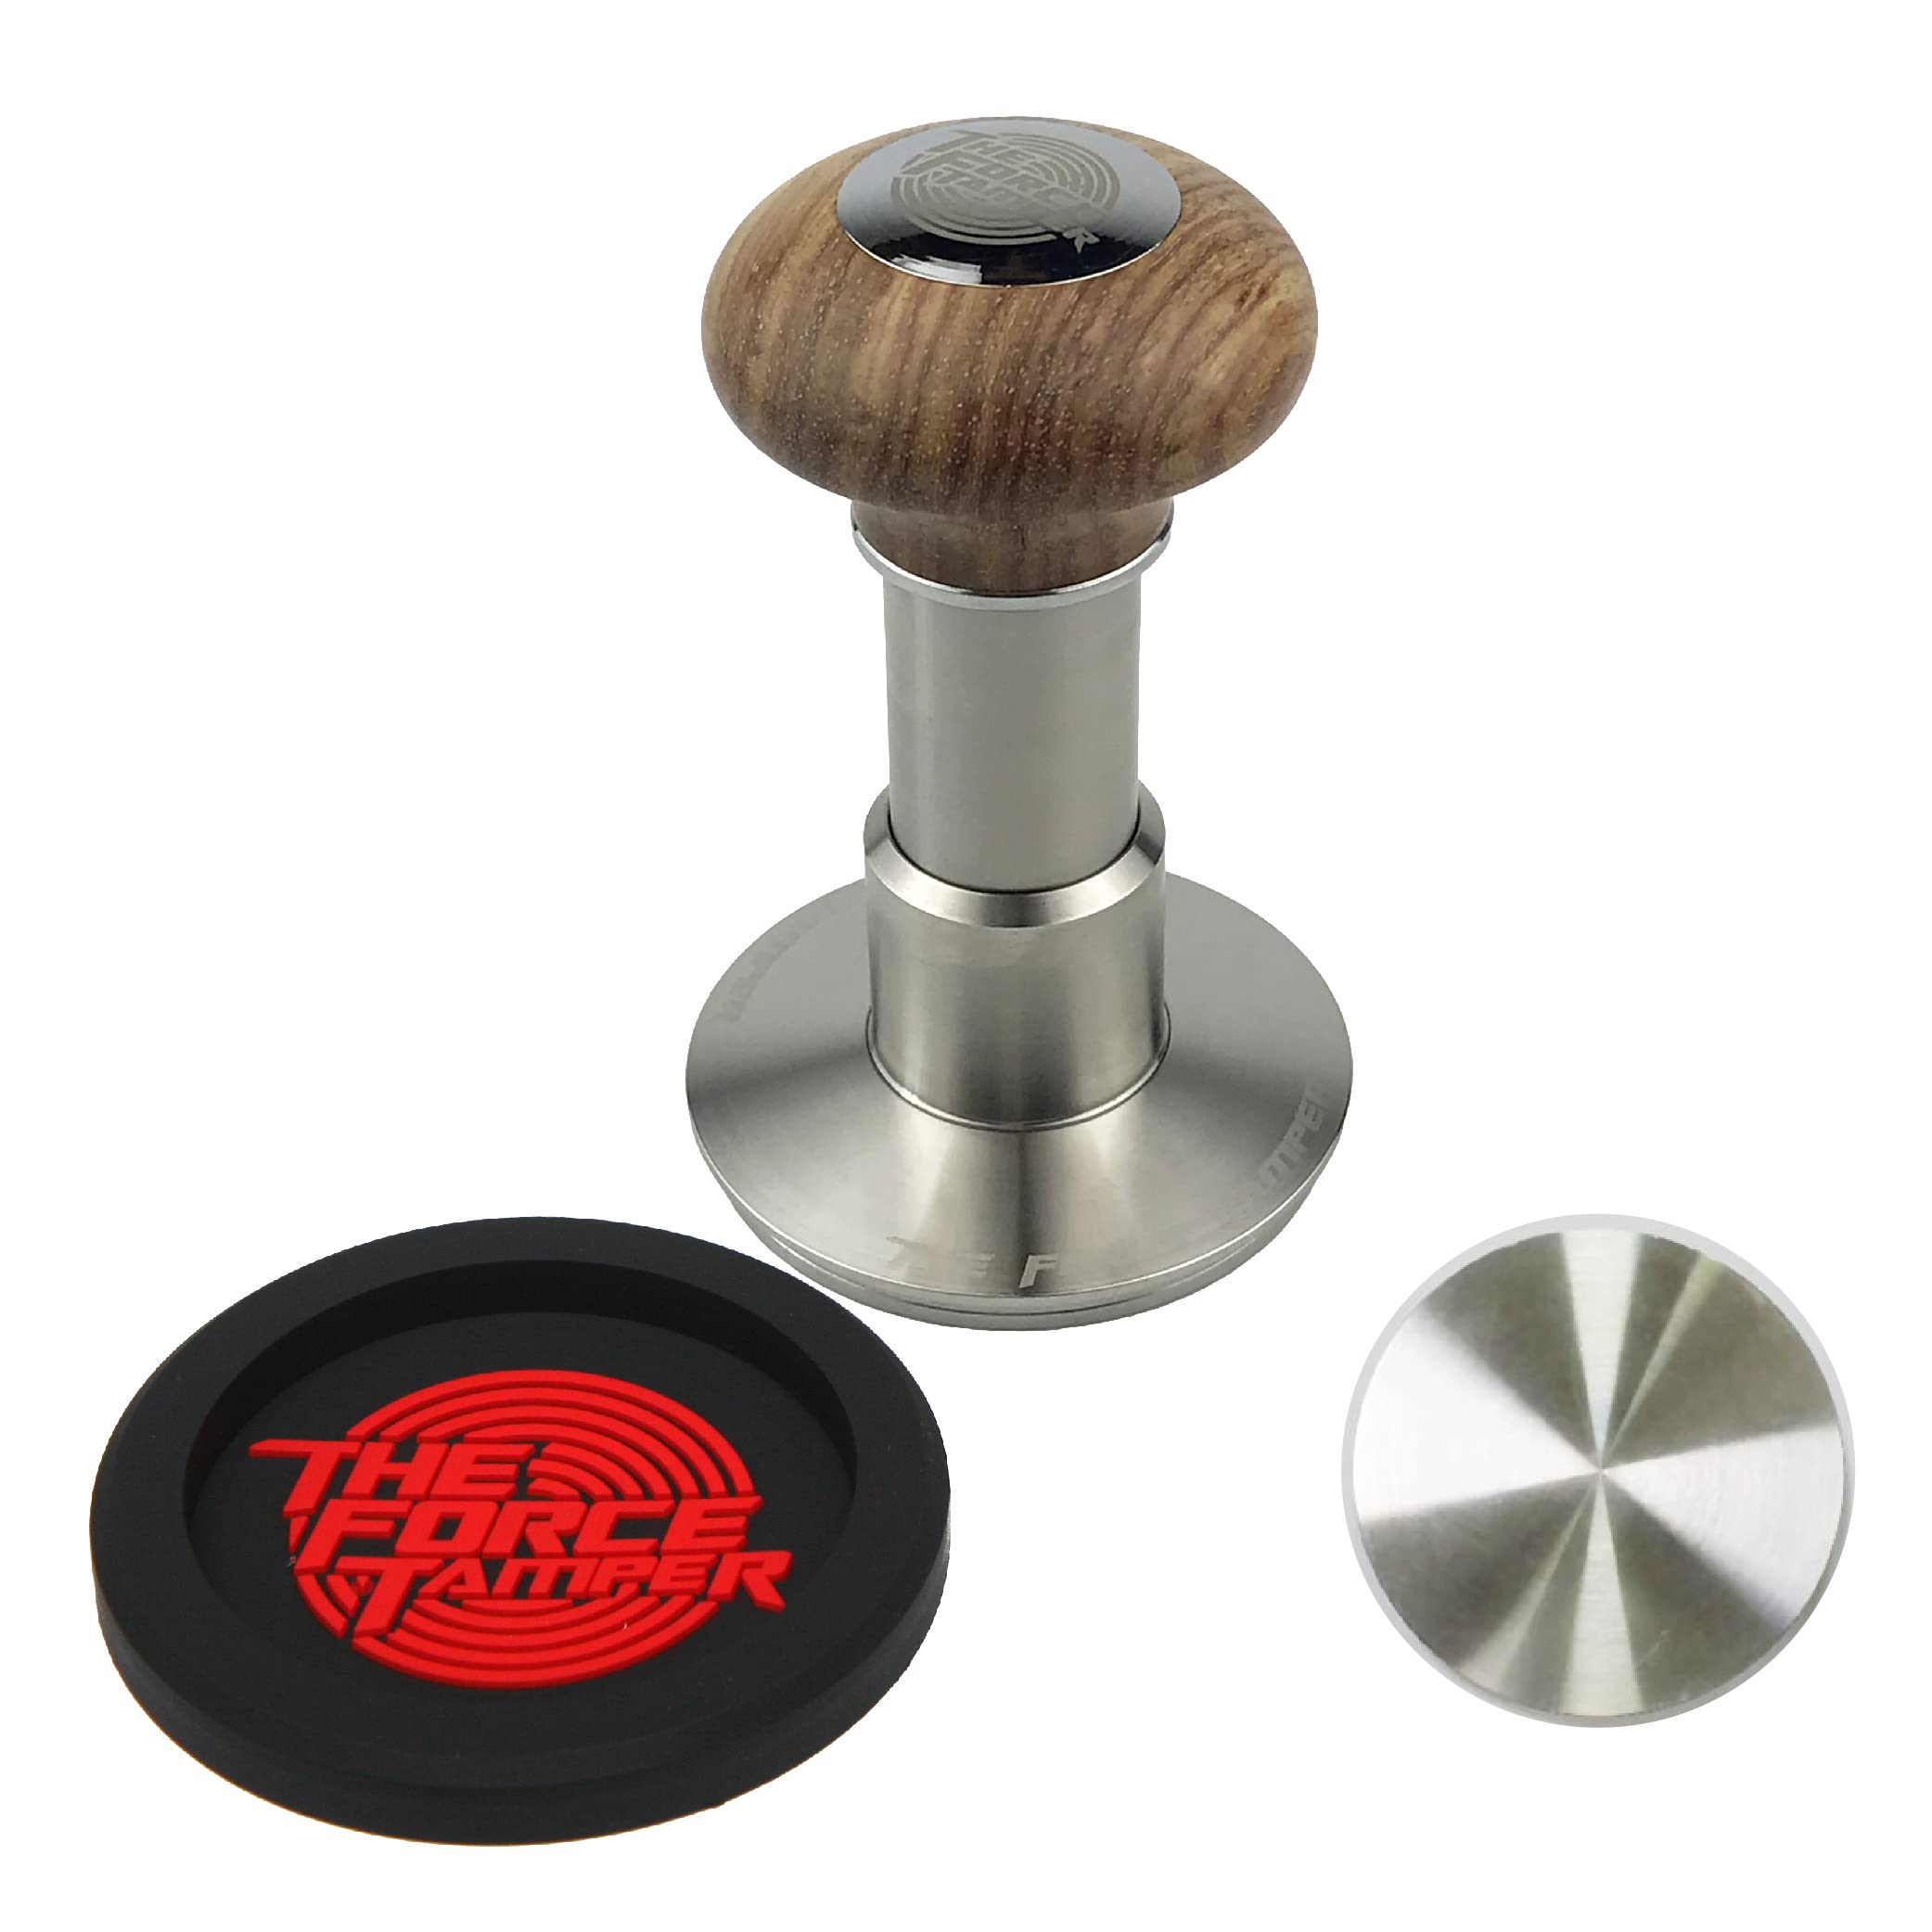 The Force Tamper Automatic Impact Coffee Tamper Standard Set (Jelly,53.00mm）